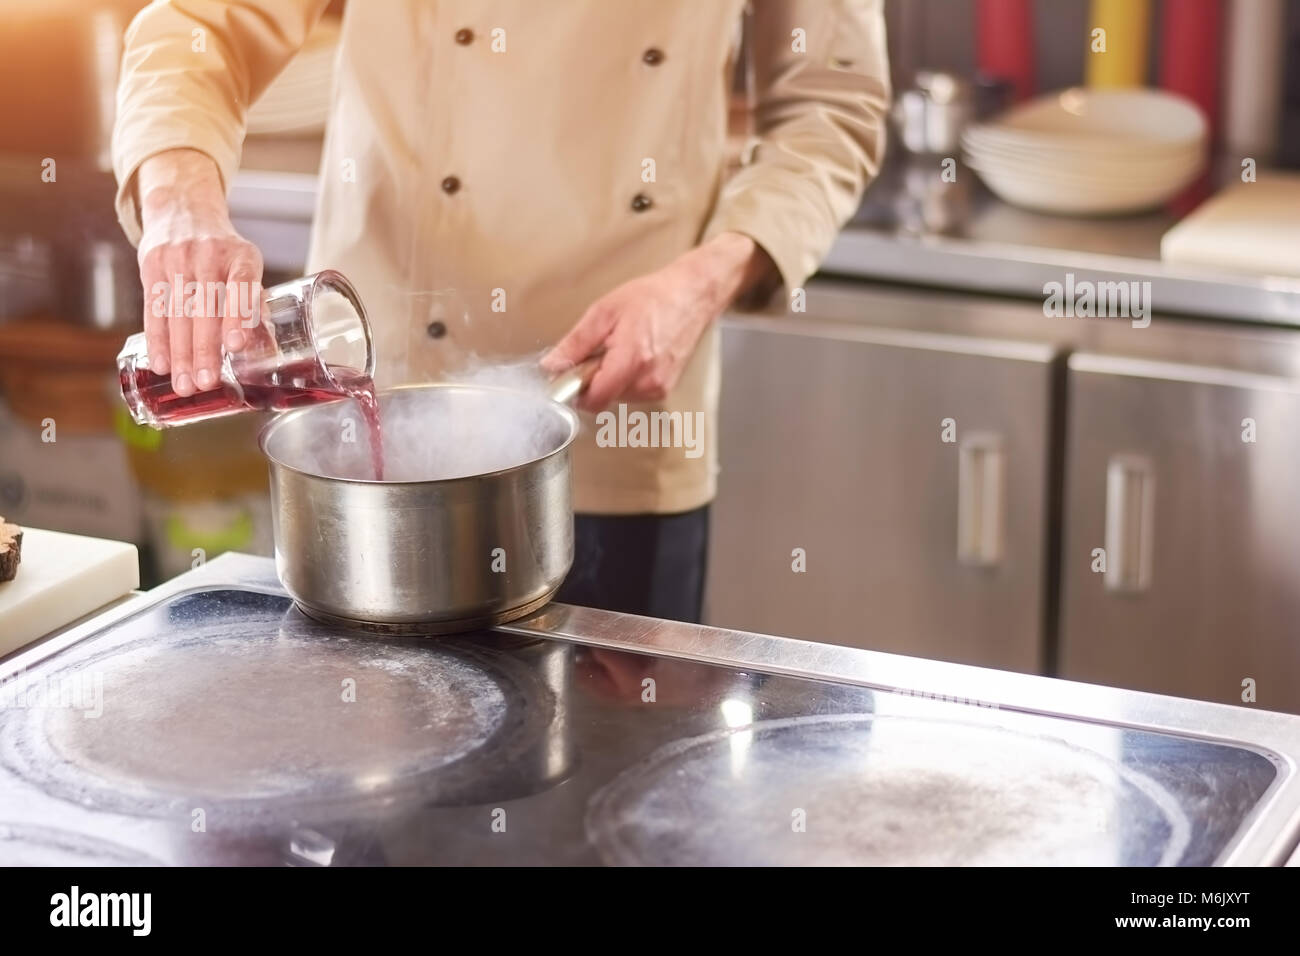 Chef pouring red sauce in casserole. Stock Photo